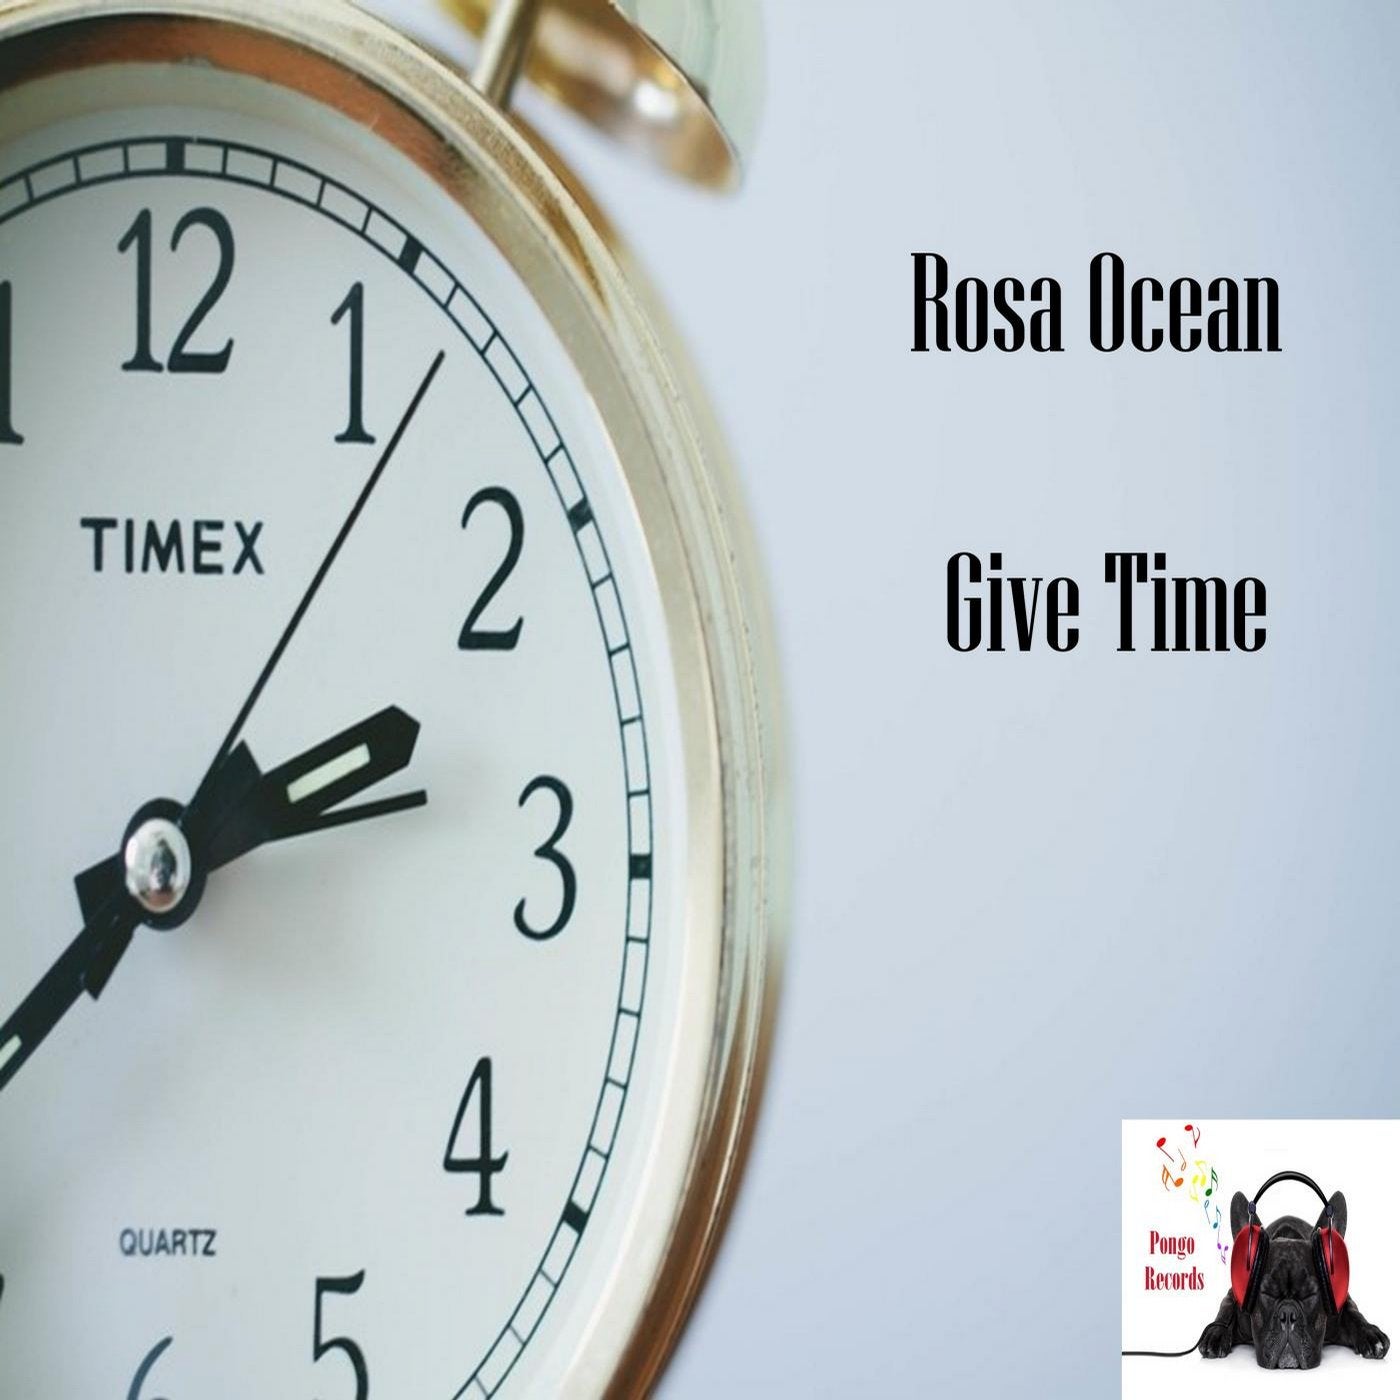 Give Time